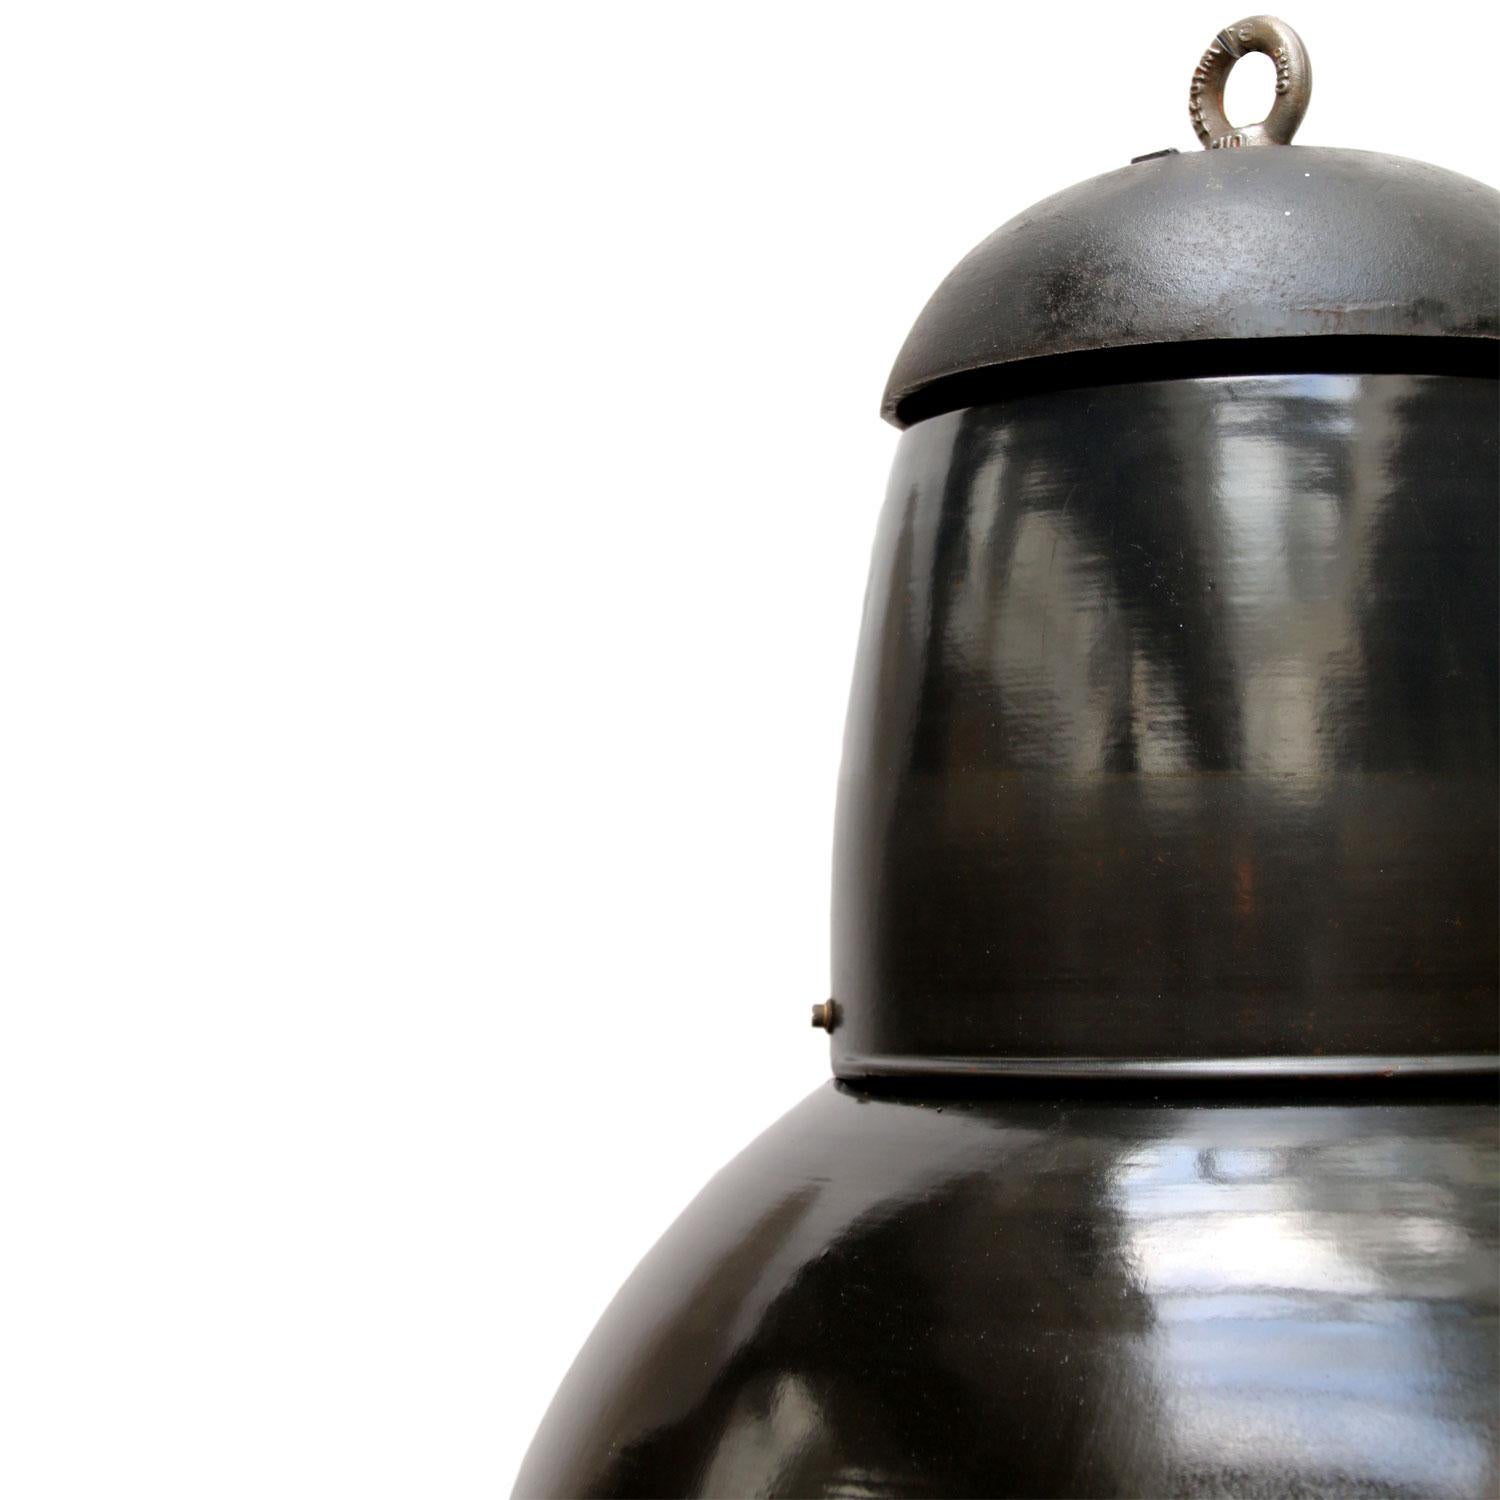 Black enamel Industrial pendant.
Cast iron top. White interior.

Weight: 7.5 kg / 16.5 lb

Priced per individual item. All lamps have been made suitable by international standards for incandescent light bulbs, energy-efficient and LED bulbs.